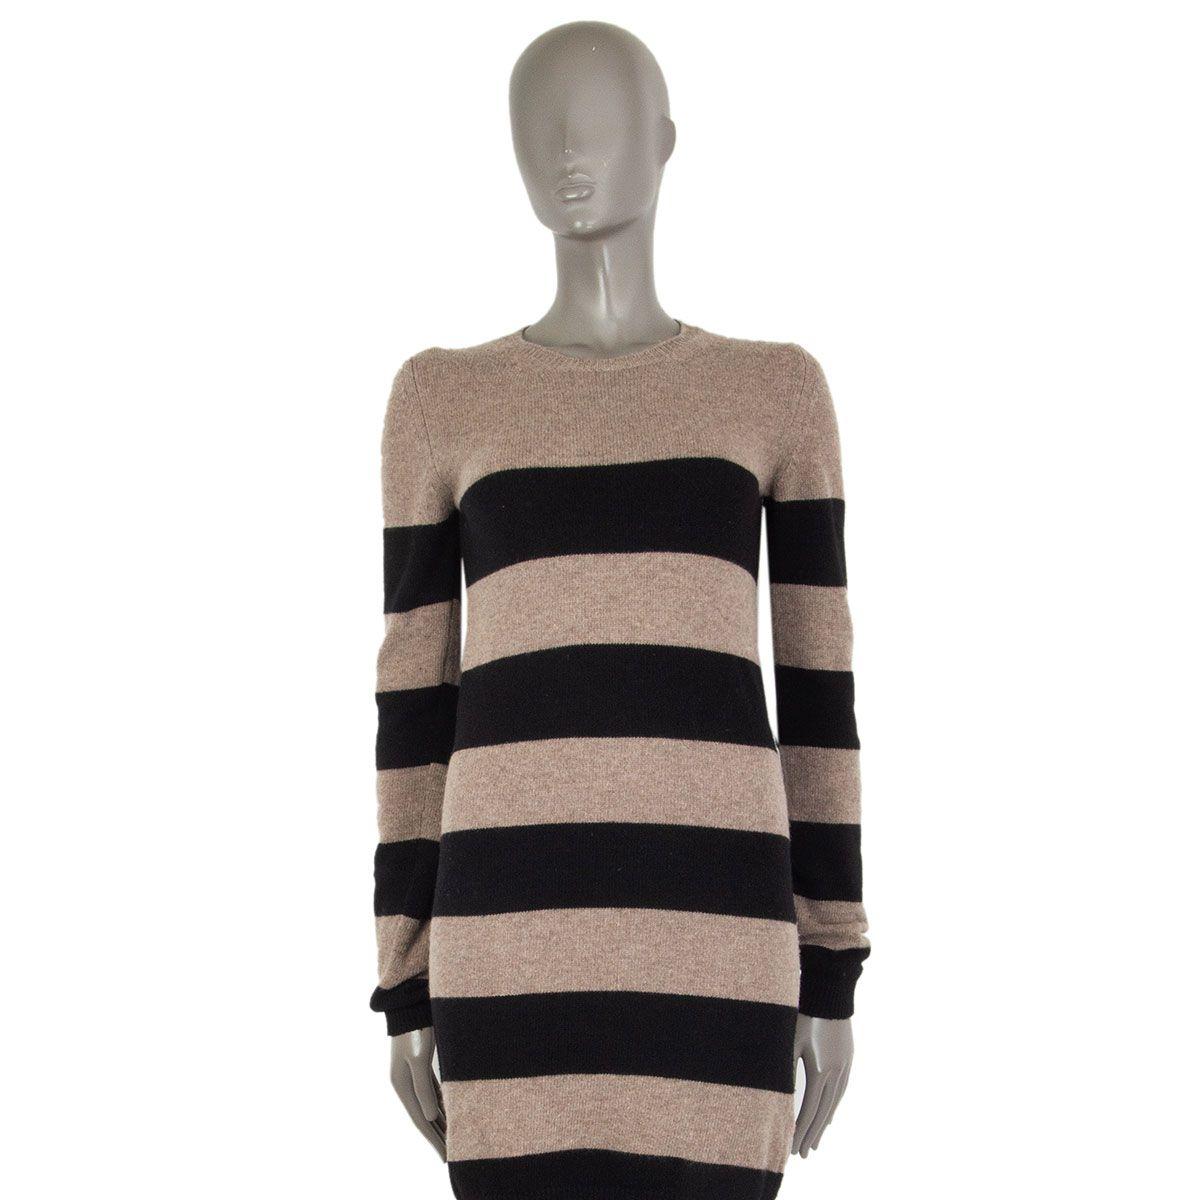 authentic Stella McCartney stripped knit crew-neck dress in black and taupe wool (80%) and cashmere (20%) with long sleeves. Unlined. Has been worn and is in excellent condition. 

Tag Size 40
Size S
Shoulder Width 40cm (15.6in)
Bust 82cm